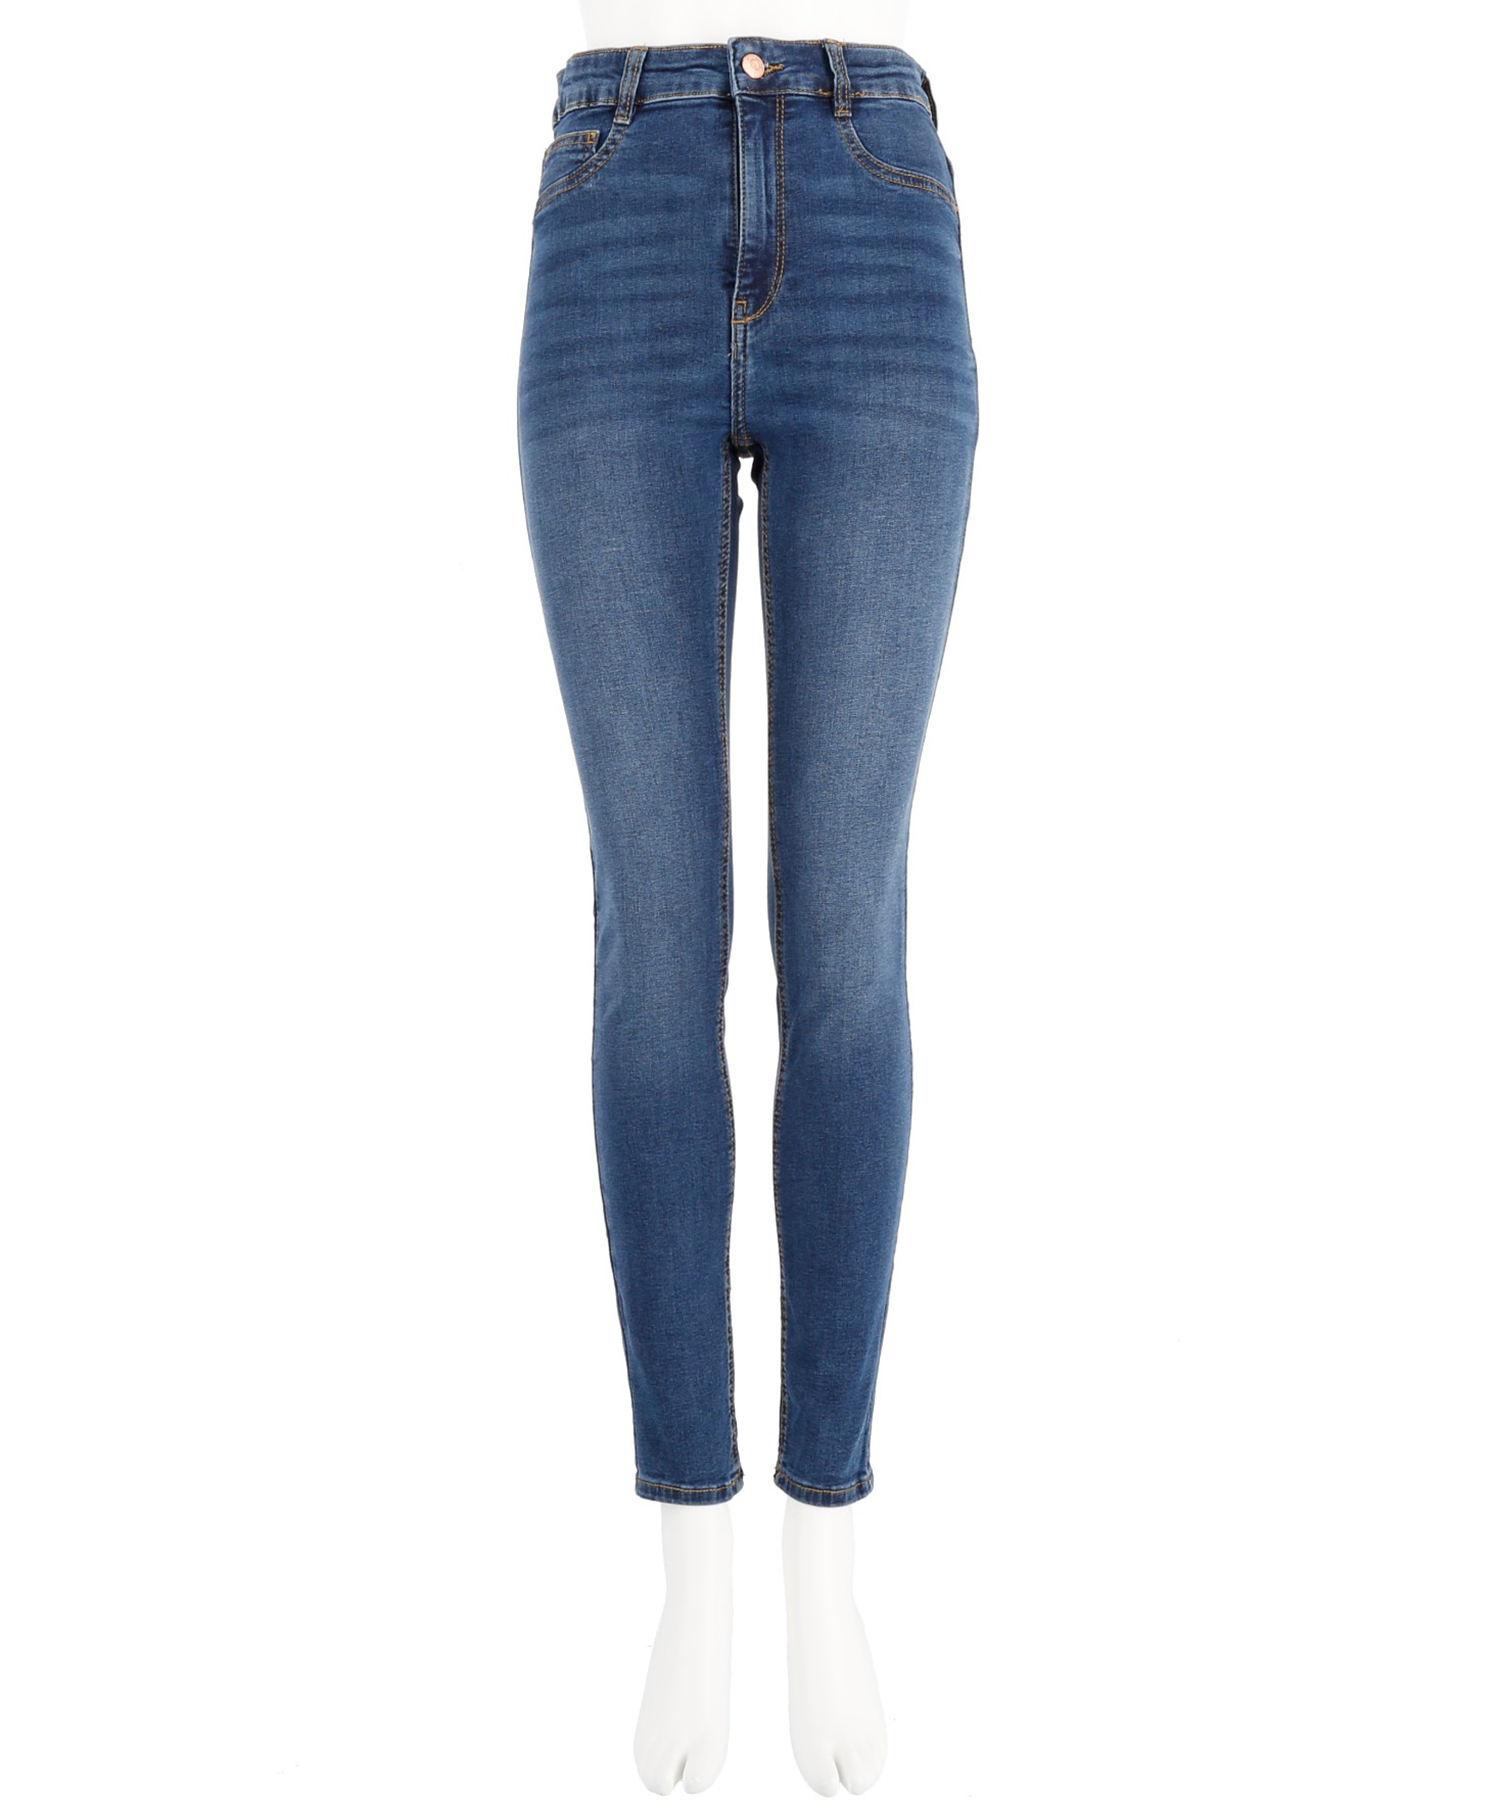 Molly high waist jeans store